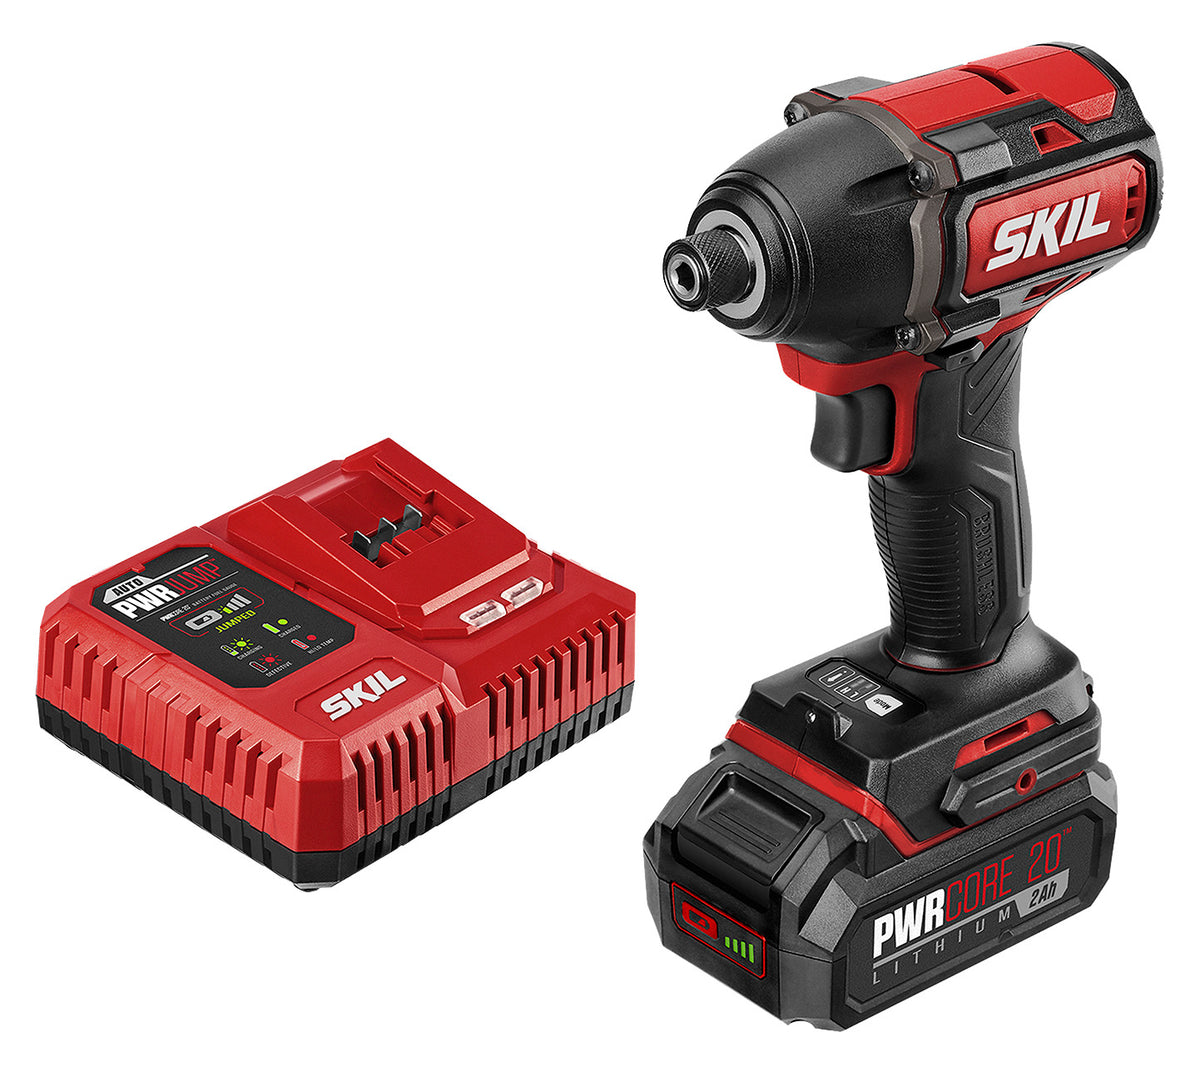 Skil ID573902 PWRCore 20 Brushless Hex Impact Driver, 20V, 1/4 Inch